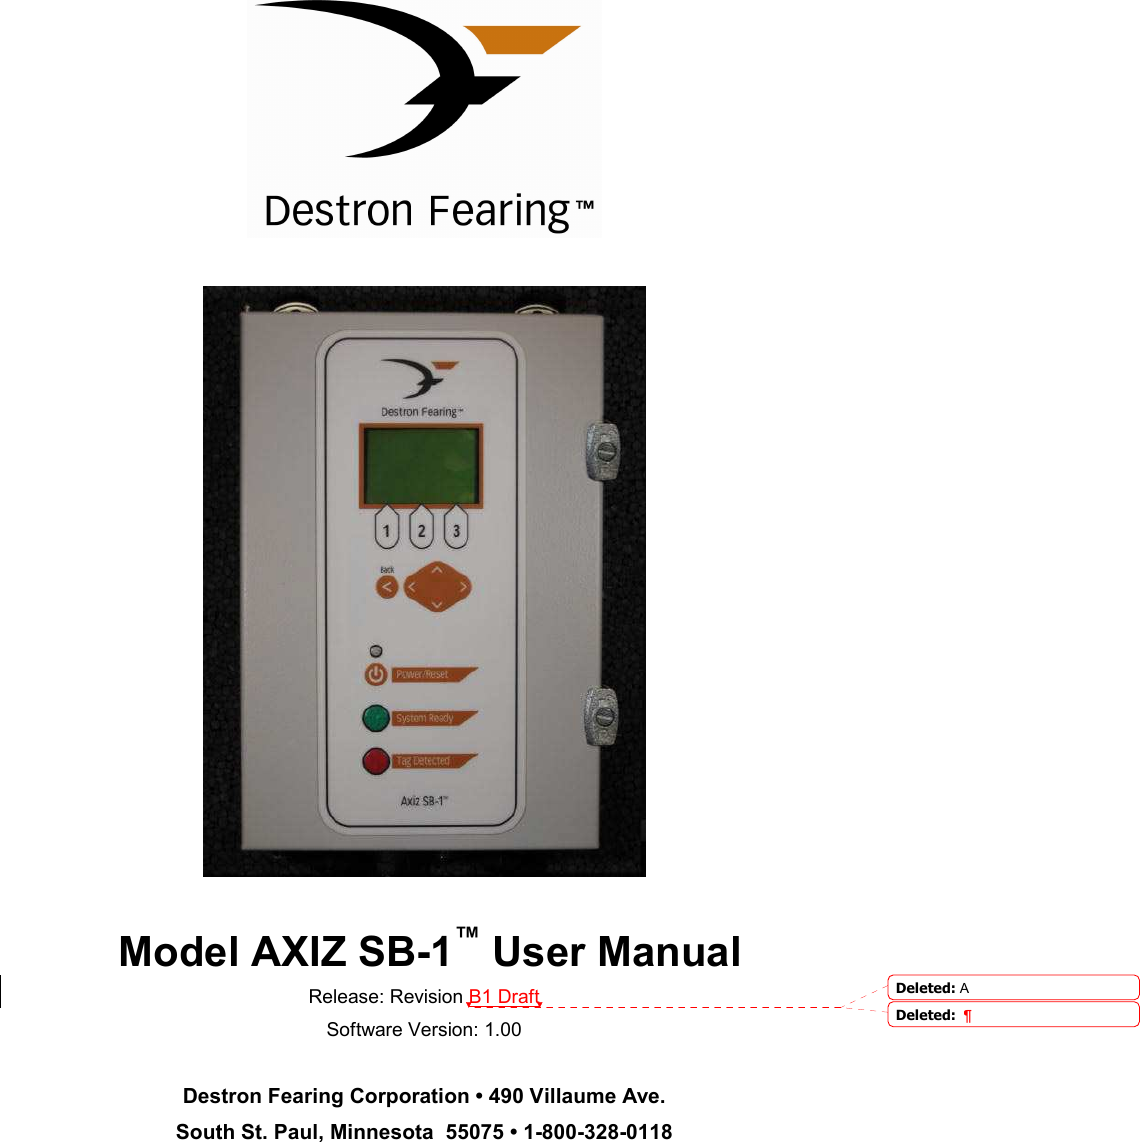       Model AXIZ SB-1™ User Manual Release: Revision B1 Draft Software Version: 1.00  Destron Fearing Corporation • 490 Villaume Ave.  South St. Paul, Minnesota  55075 • 1-800-328-0118 Deleted: ADeleted:  ¶